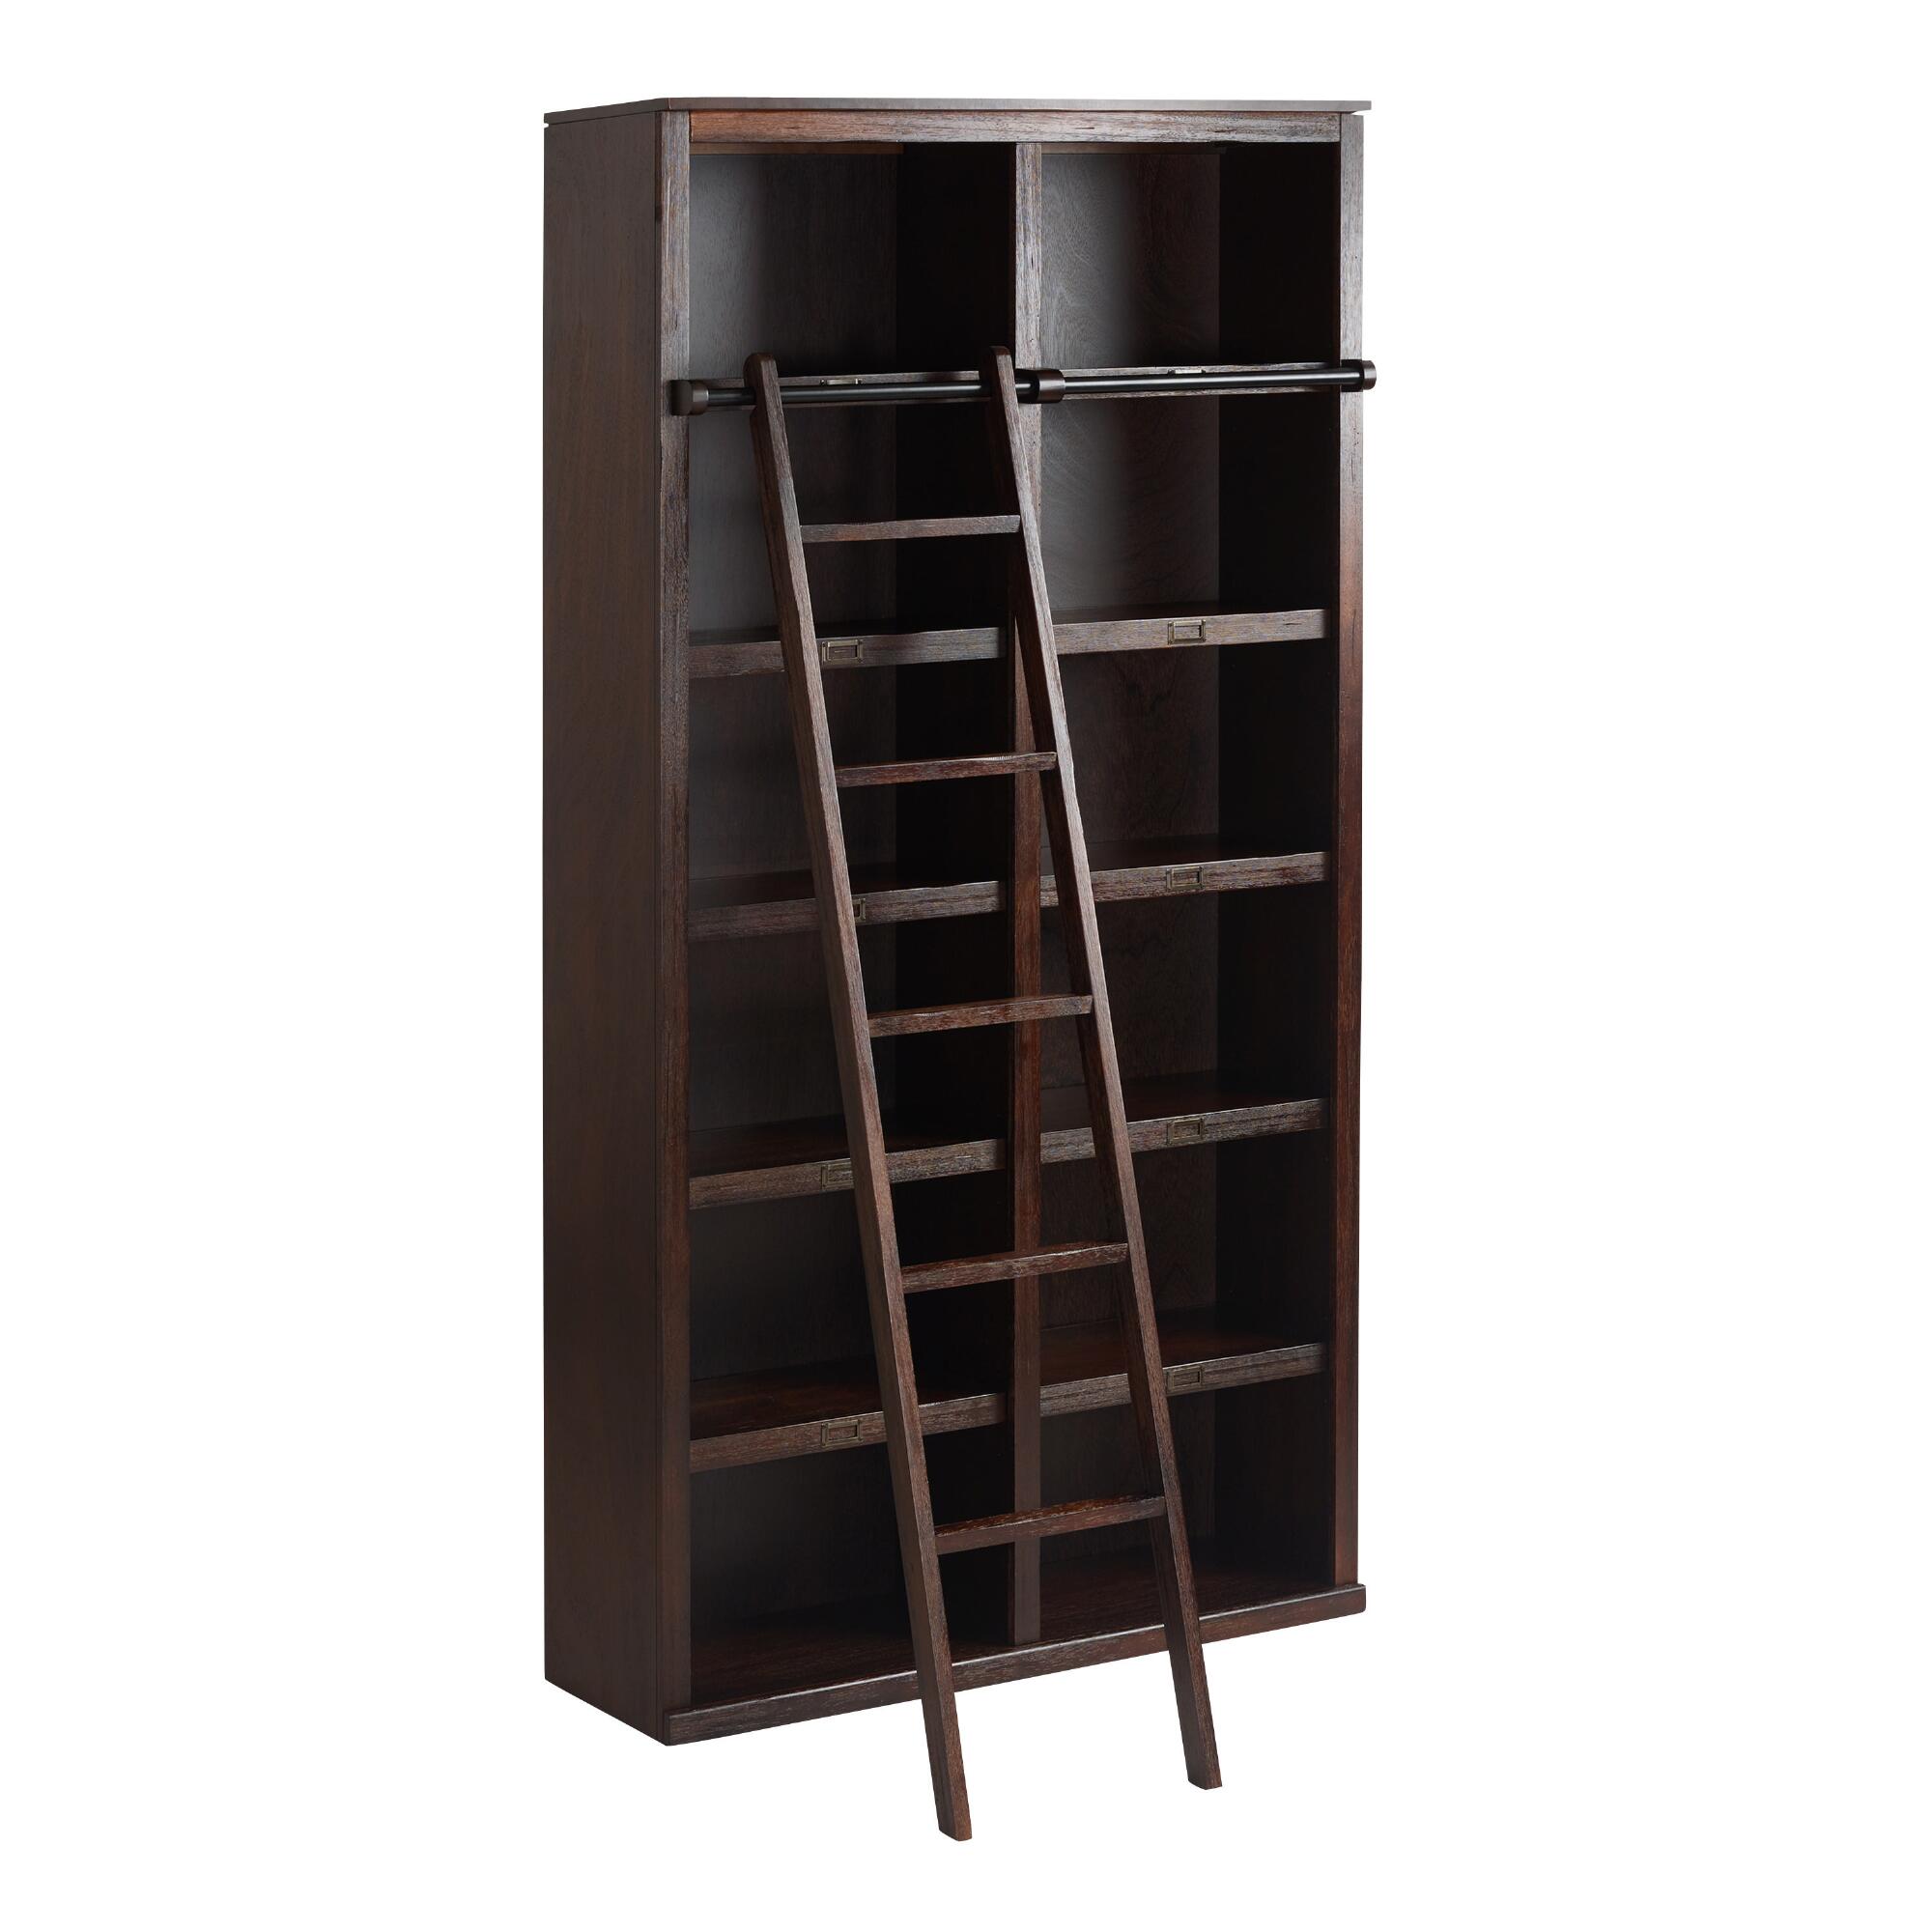 Espresso Augustus Library Shelf Collection by World Market